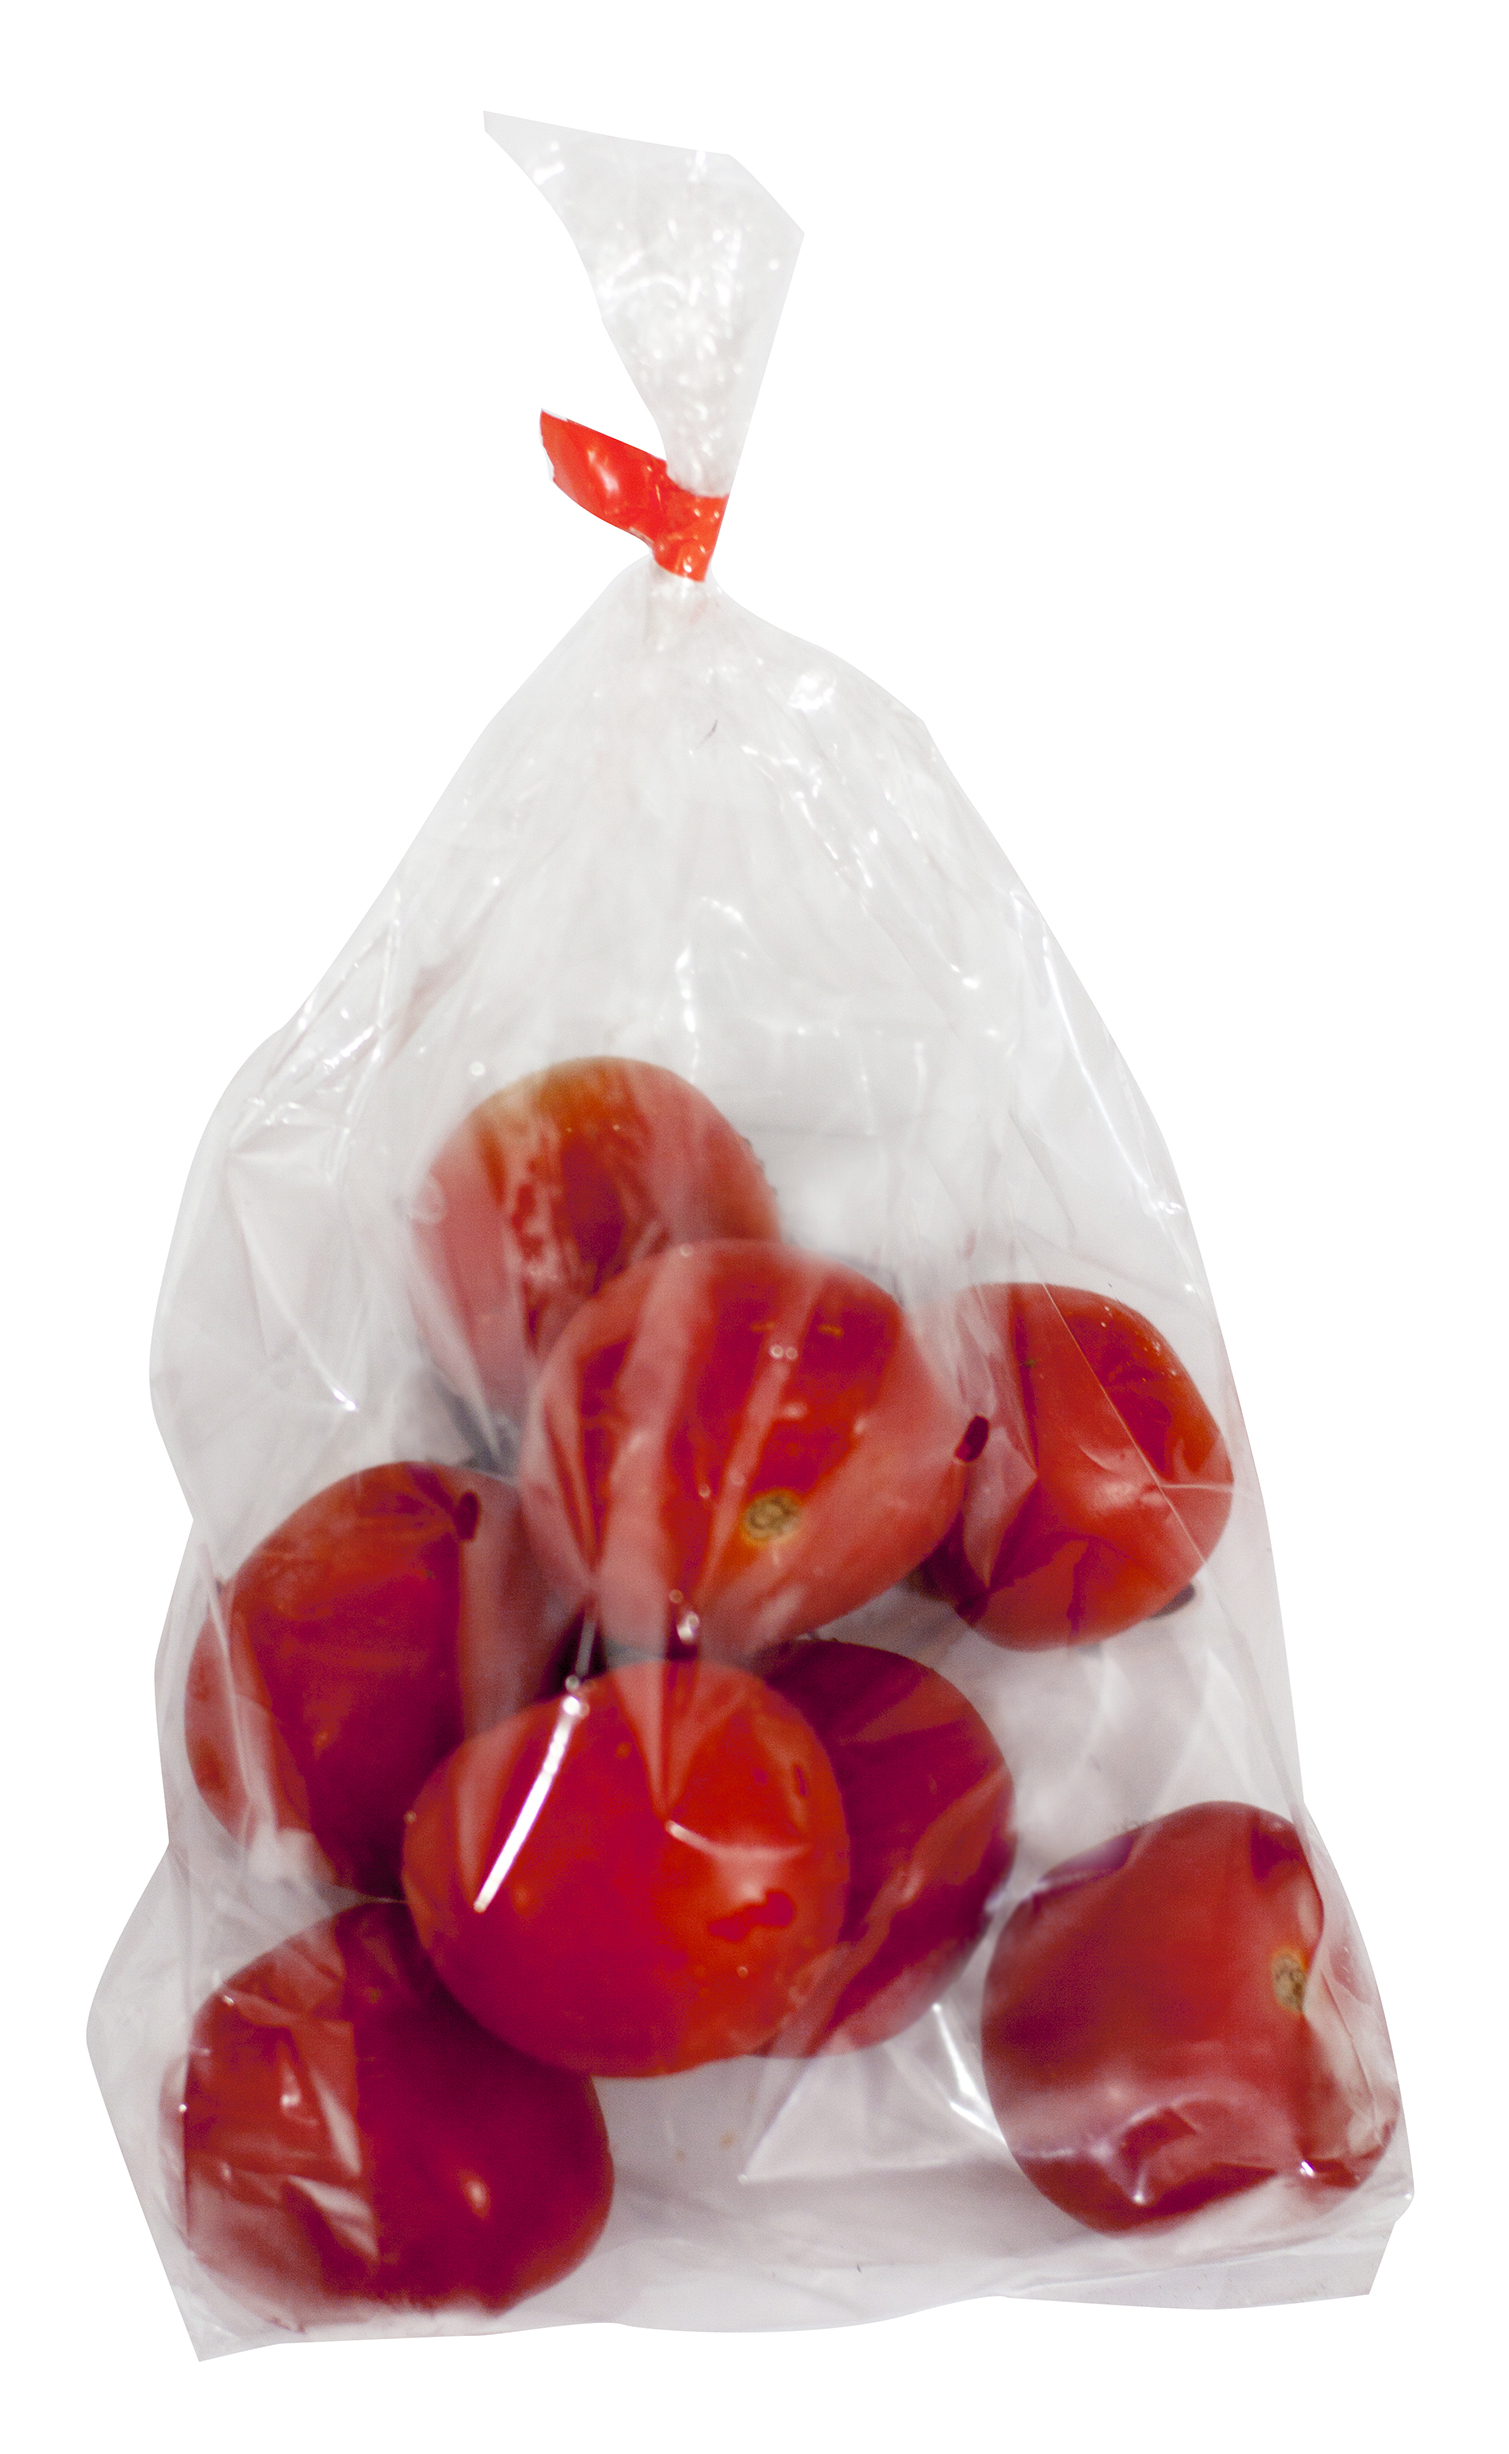 Tomatoes in Polypropylene Bag sealed with Red Bag Seal Tape